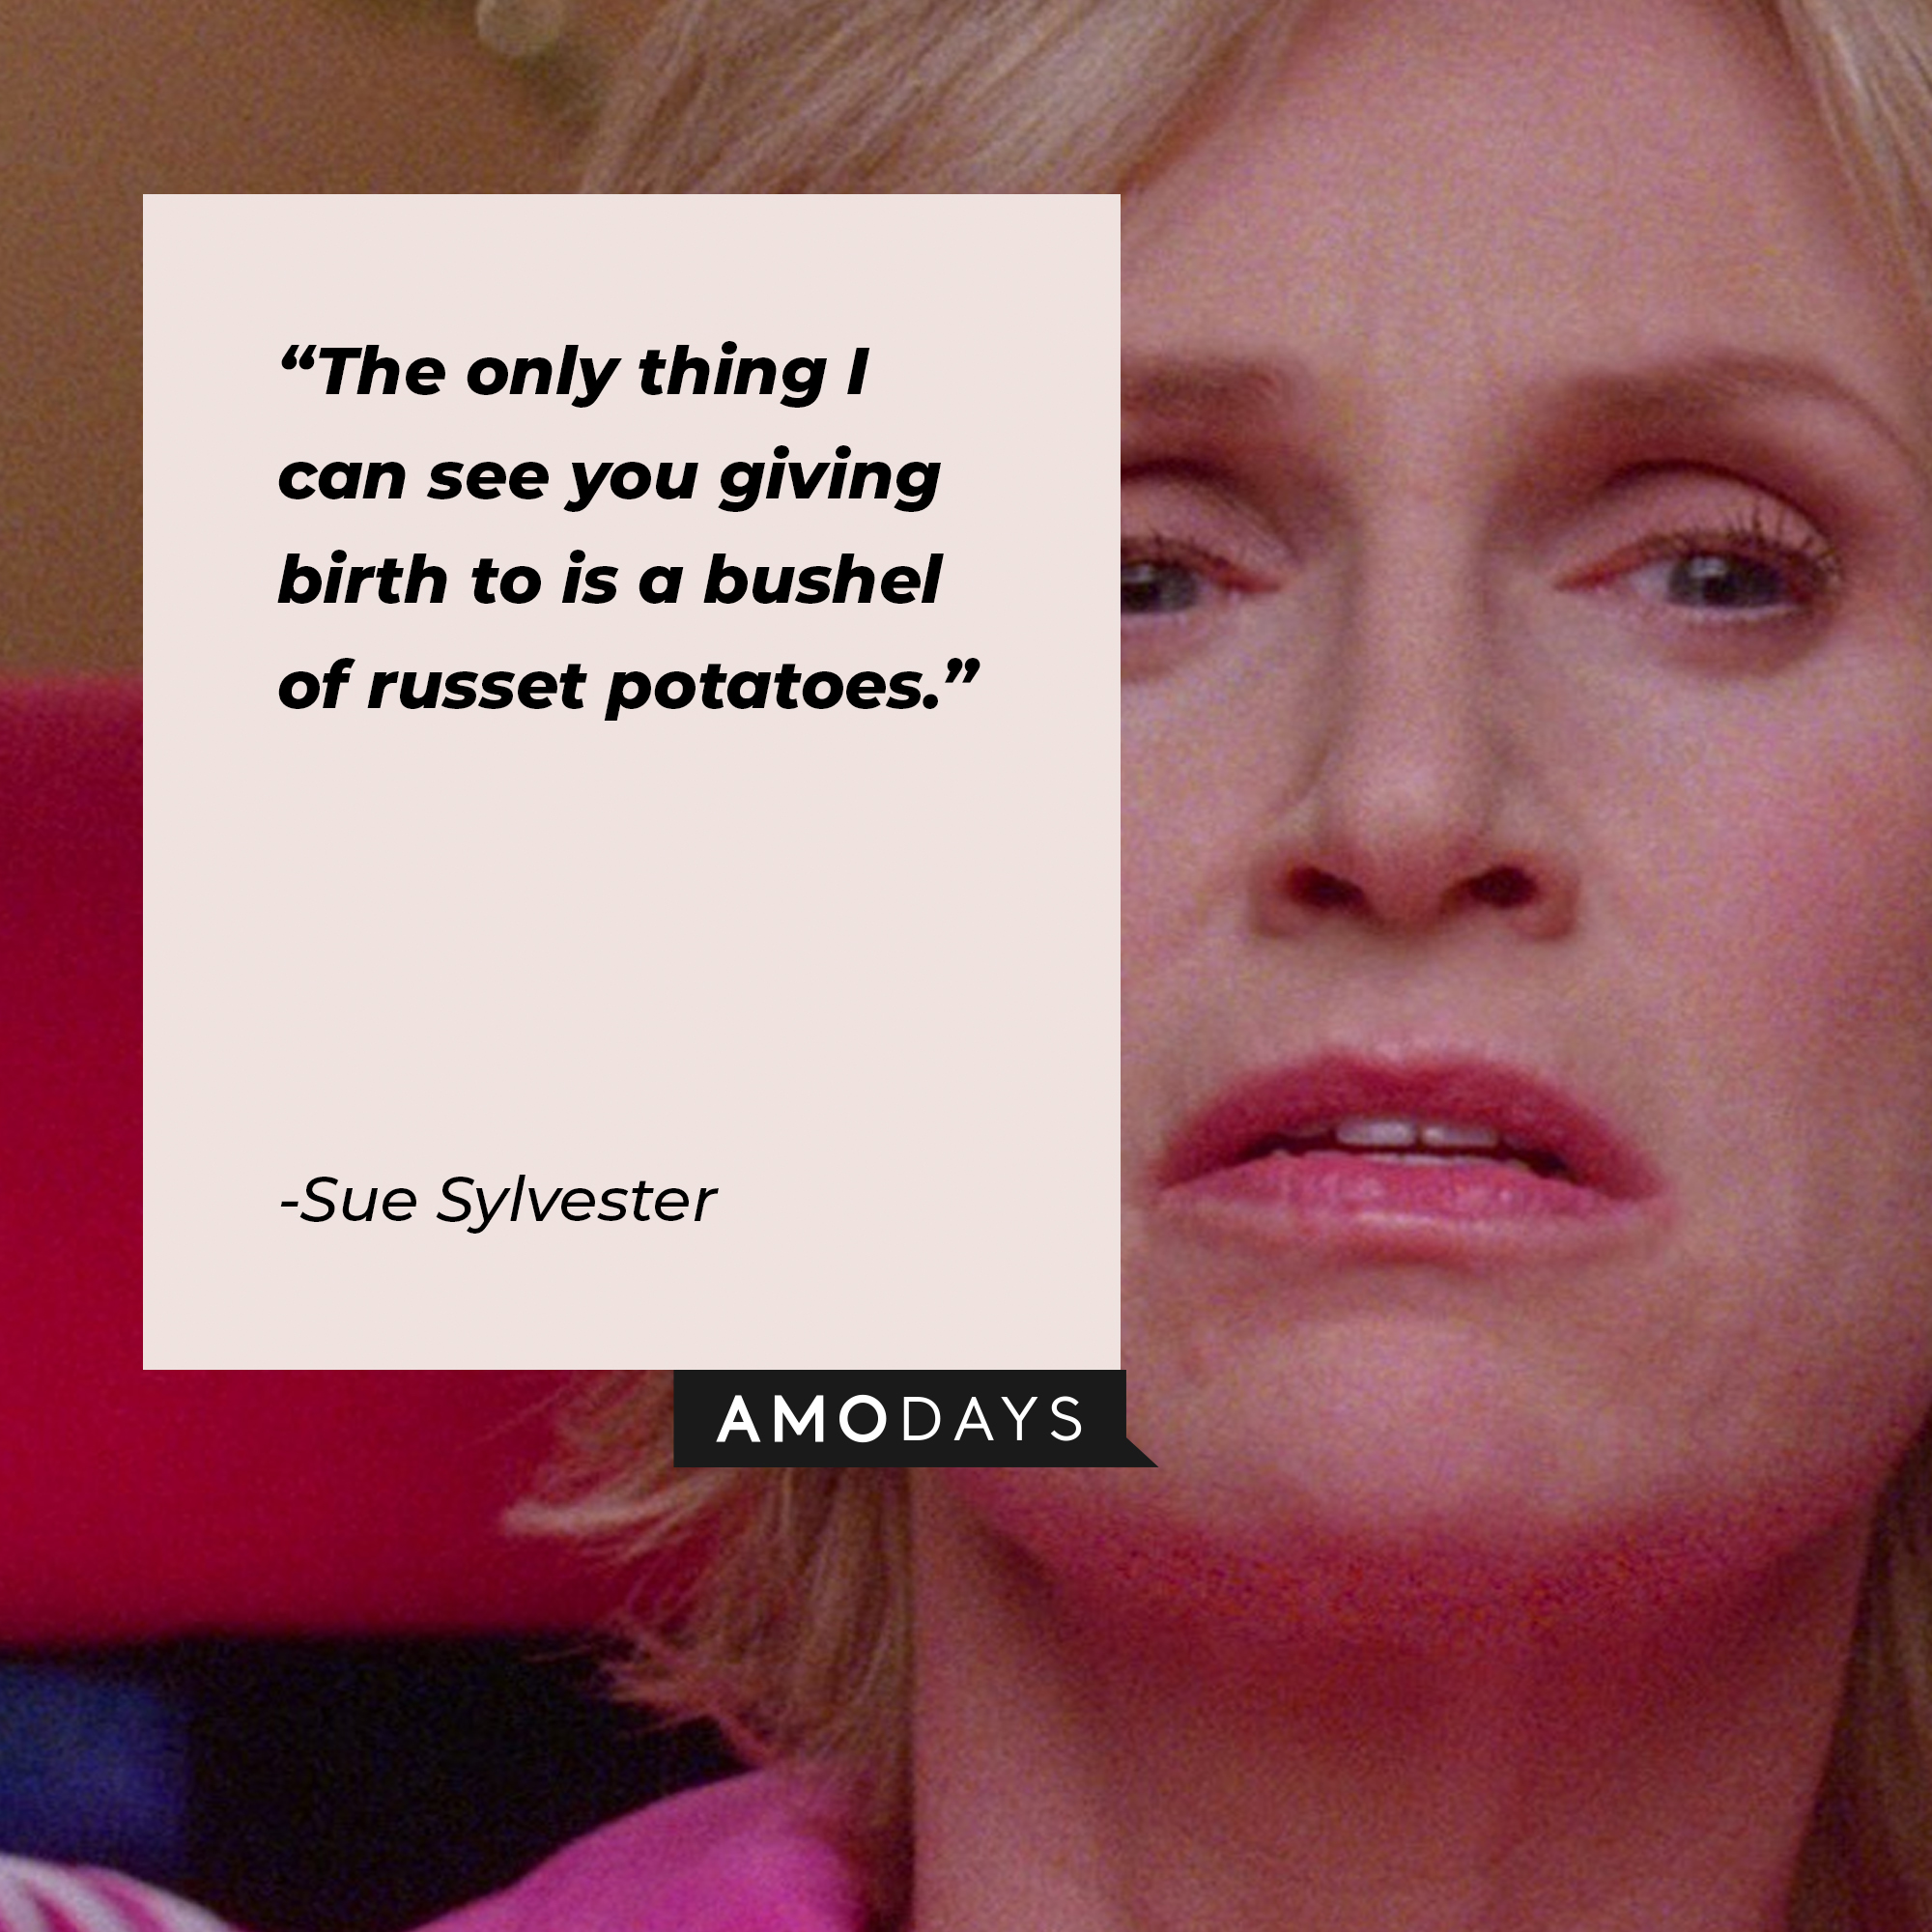 A picture of Sue Sylester with a quote by her : “The only thing I can see you giving birth to is a bushel of russet potatoes.” | Source: facebook.com/Glee